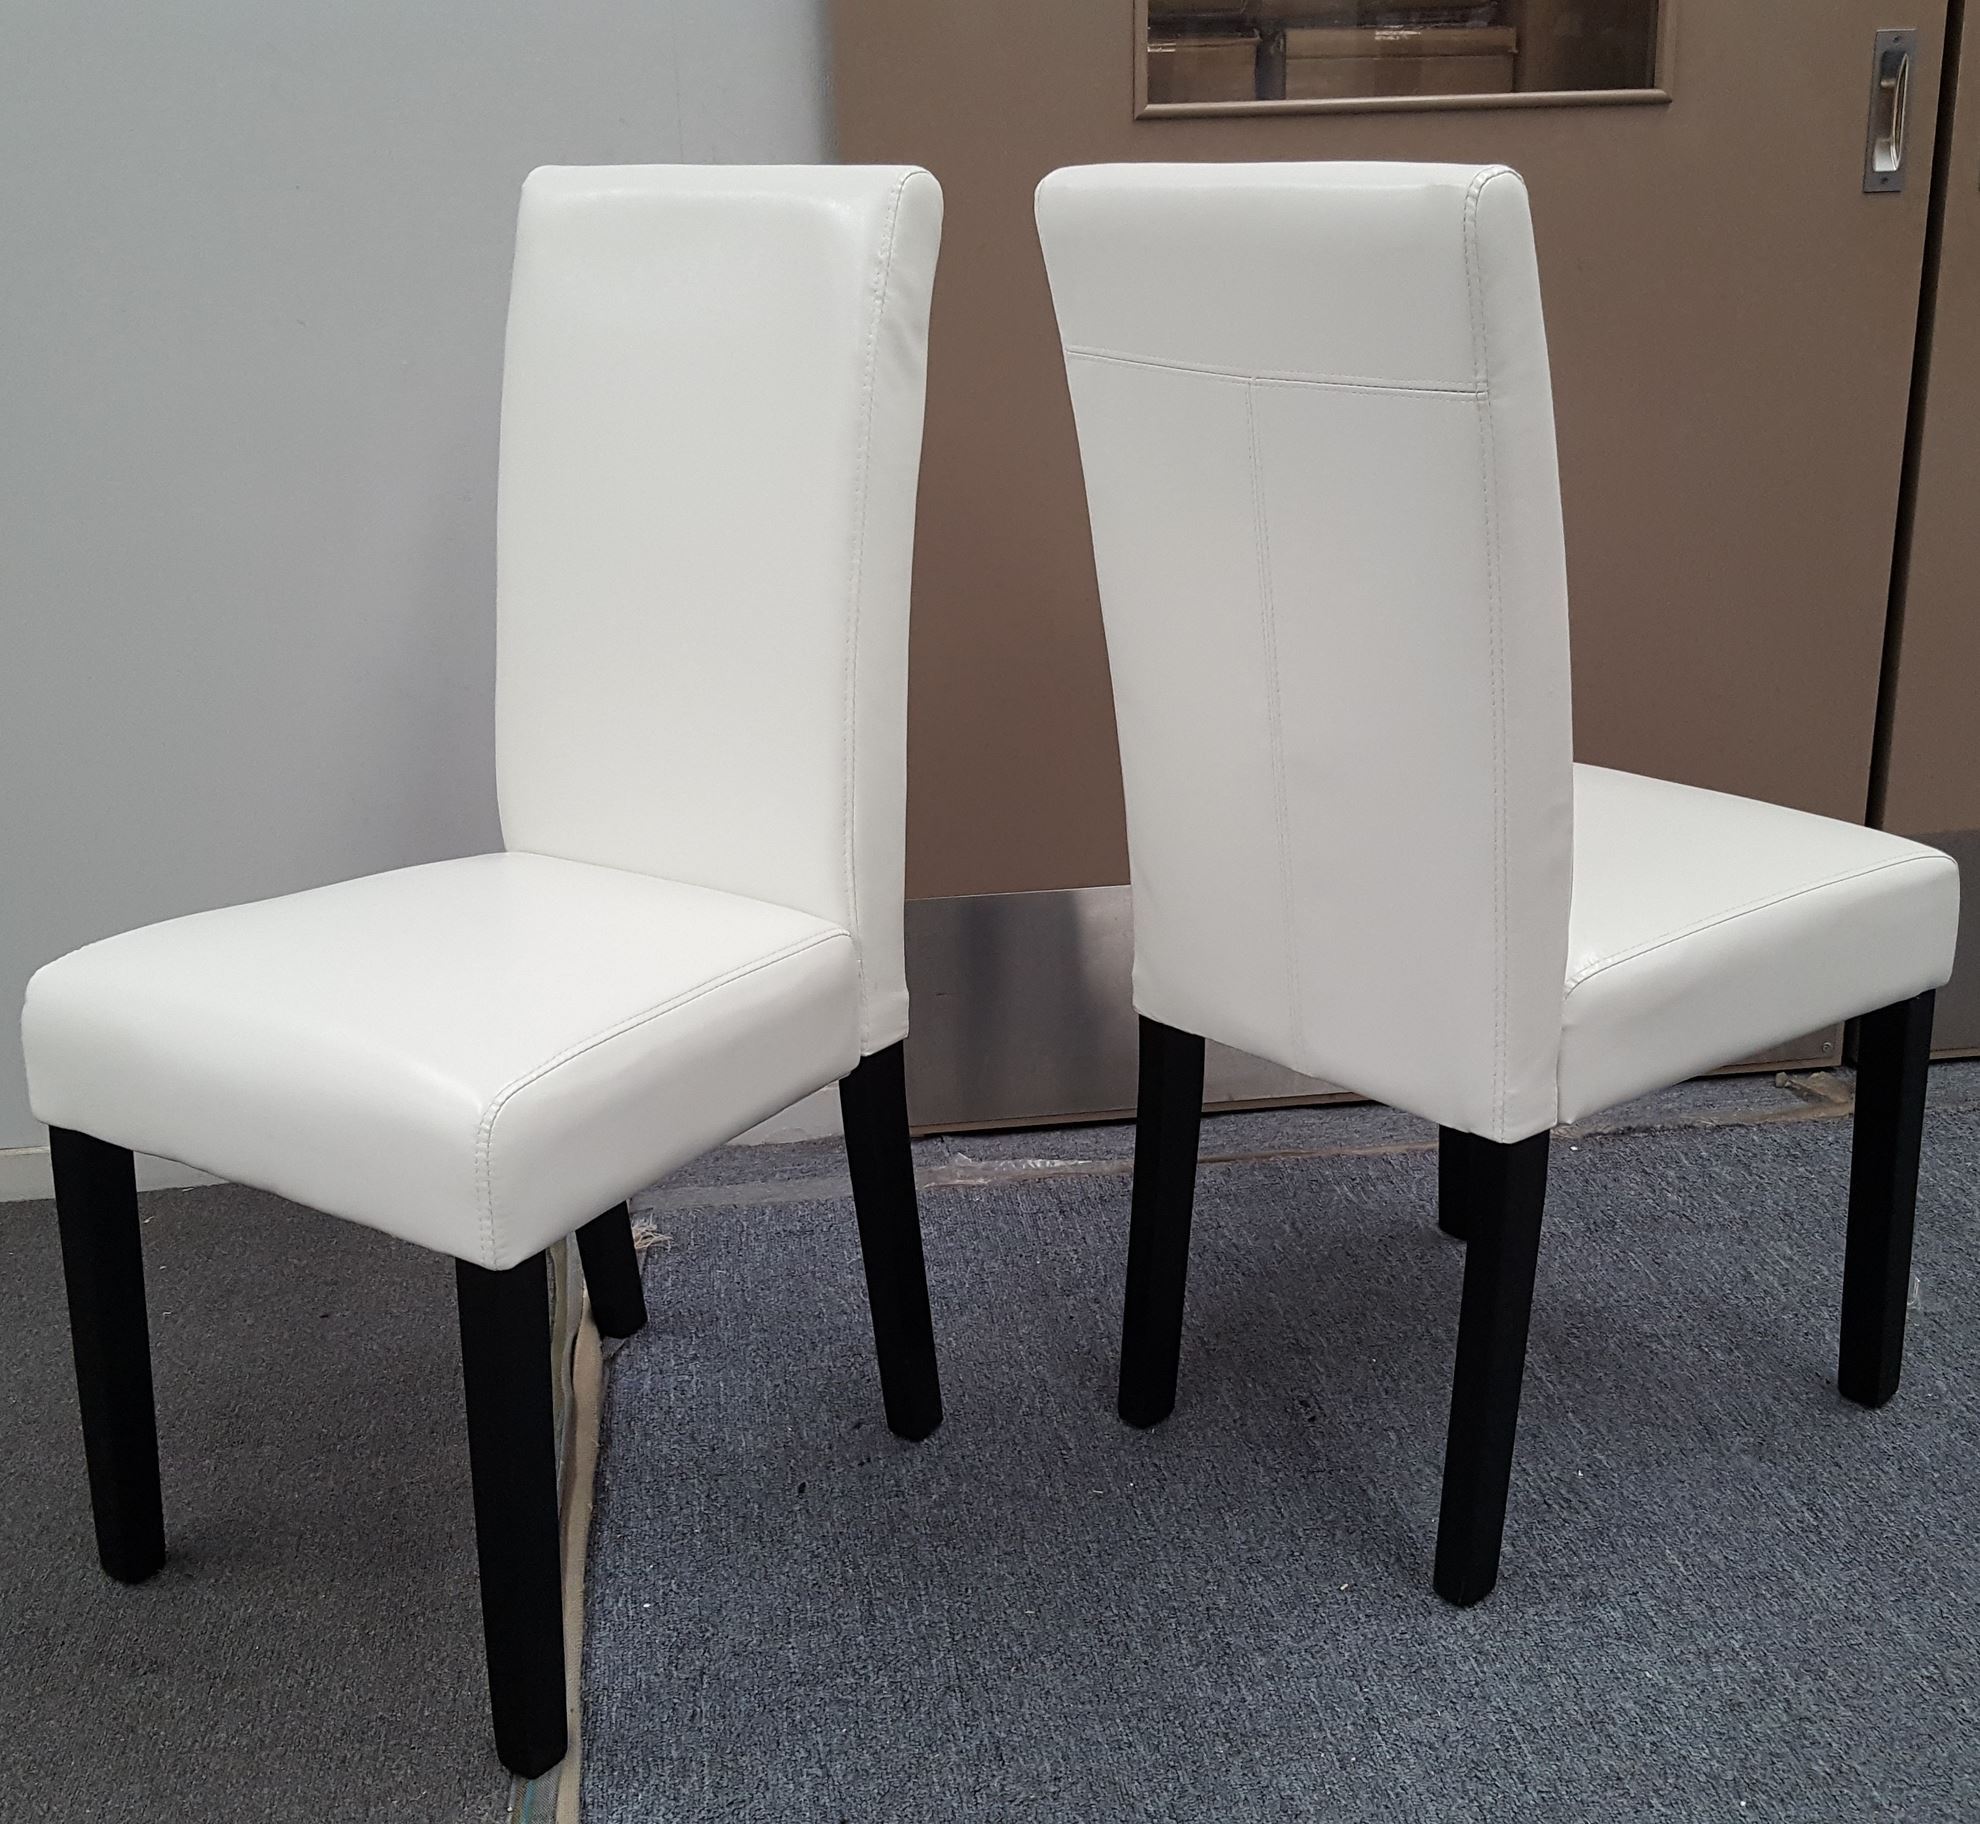 Furniture Place: Zoe Dining Chair White PU Leather Dark Legs